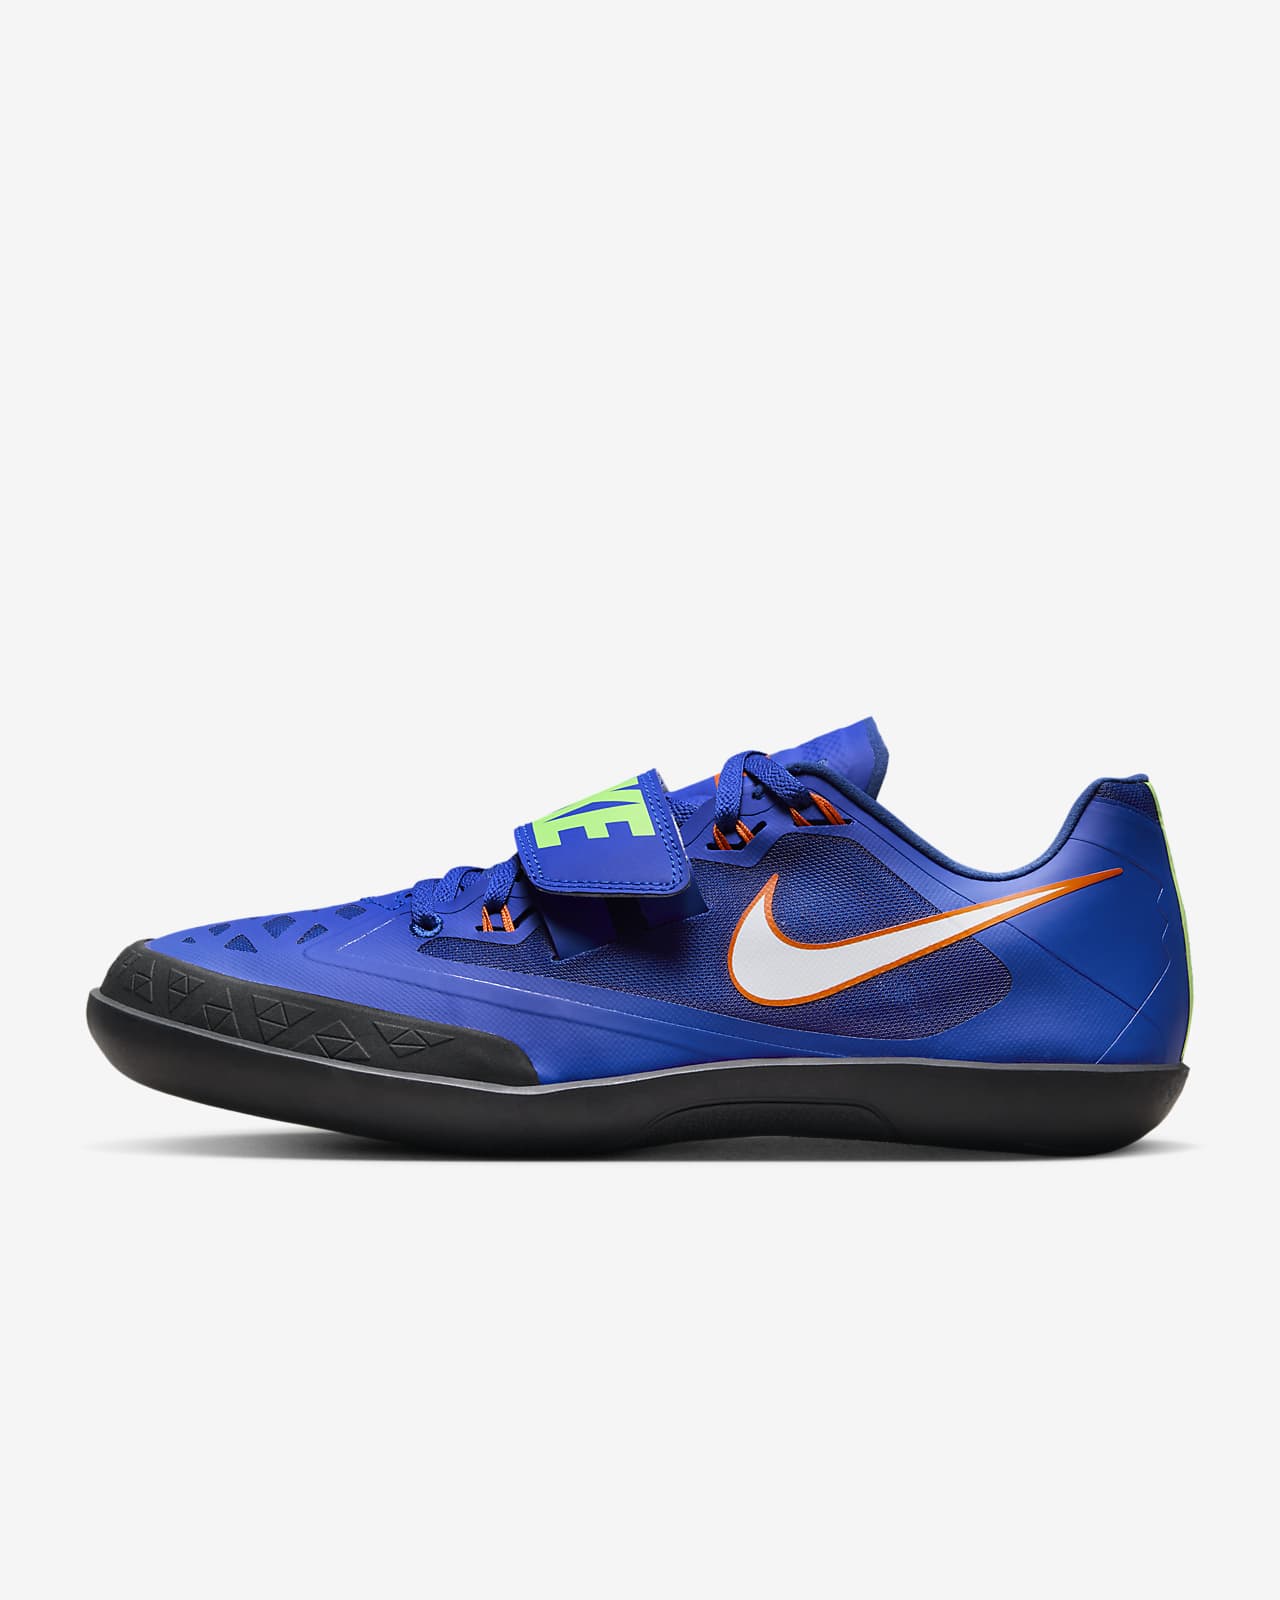 Nike Zoom SD 4 Athletics Throwing Shoes